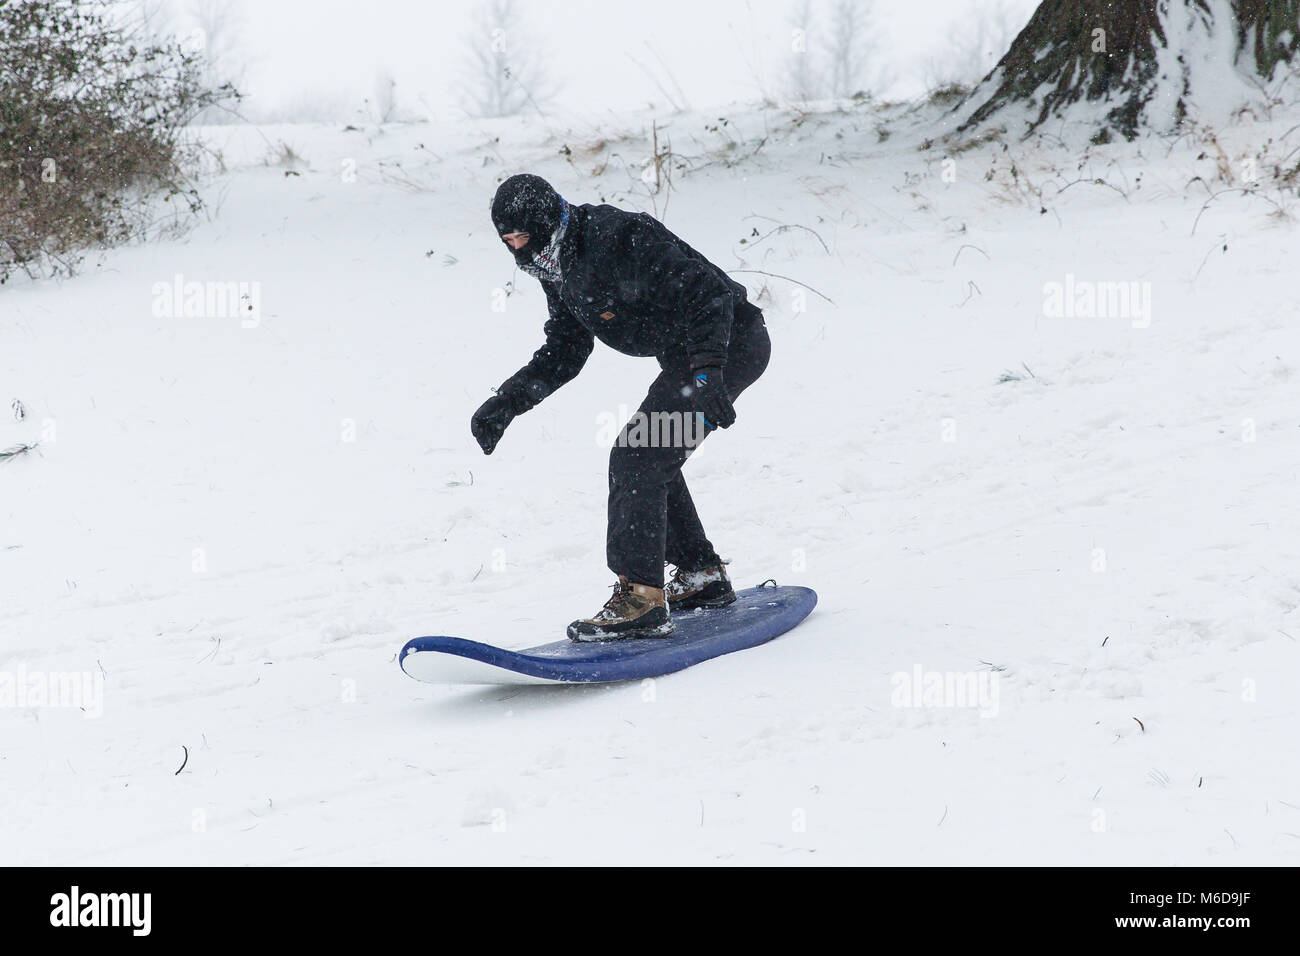 Celbridge, Kildare, Ireland. 02 Mar 2018: Teenagers using surf board to slide down the hill covered in snow. Beast from the east followed by storm Emma brought more snow and high winds across Ireland. Stock Photo